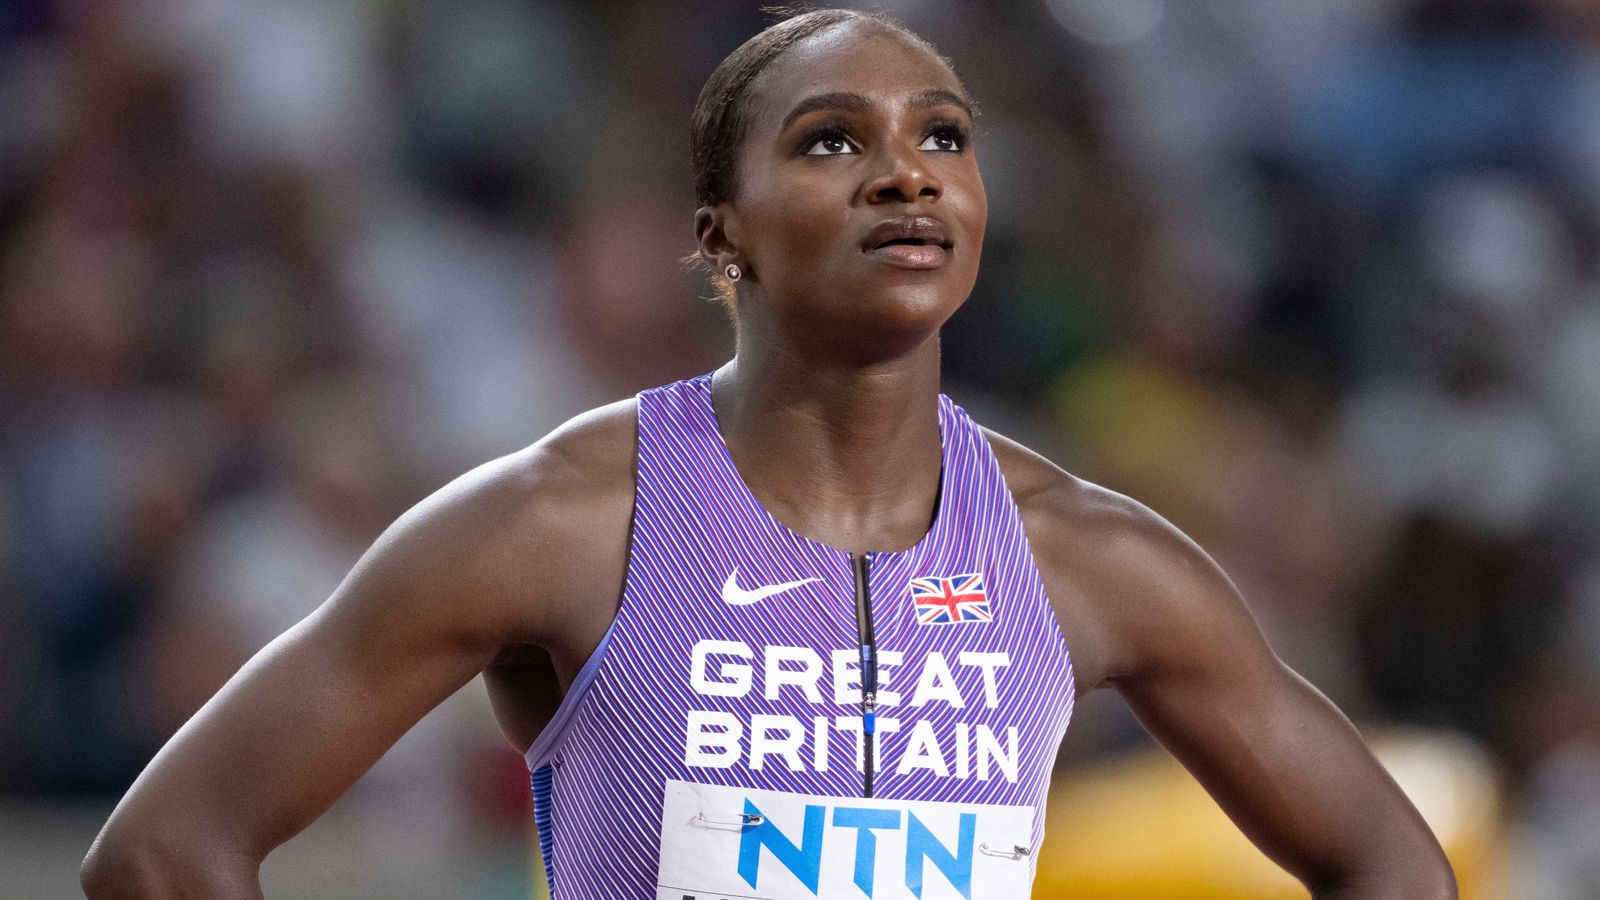 Dina Asher-Smith, Katarina Johnson-Thompson withdraw from World Indoor Championships to focus on Olympics |  News from the Olympic Games